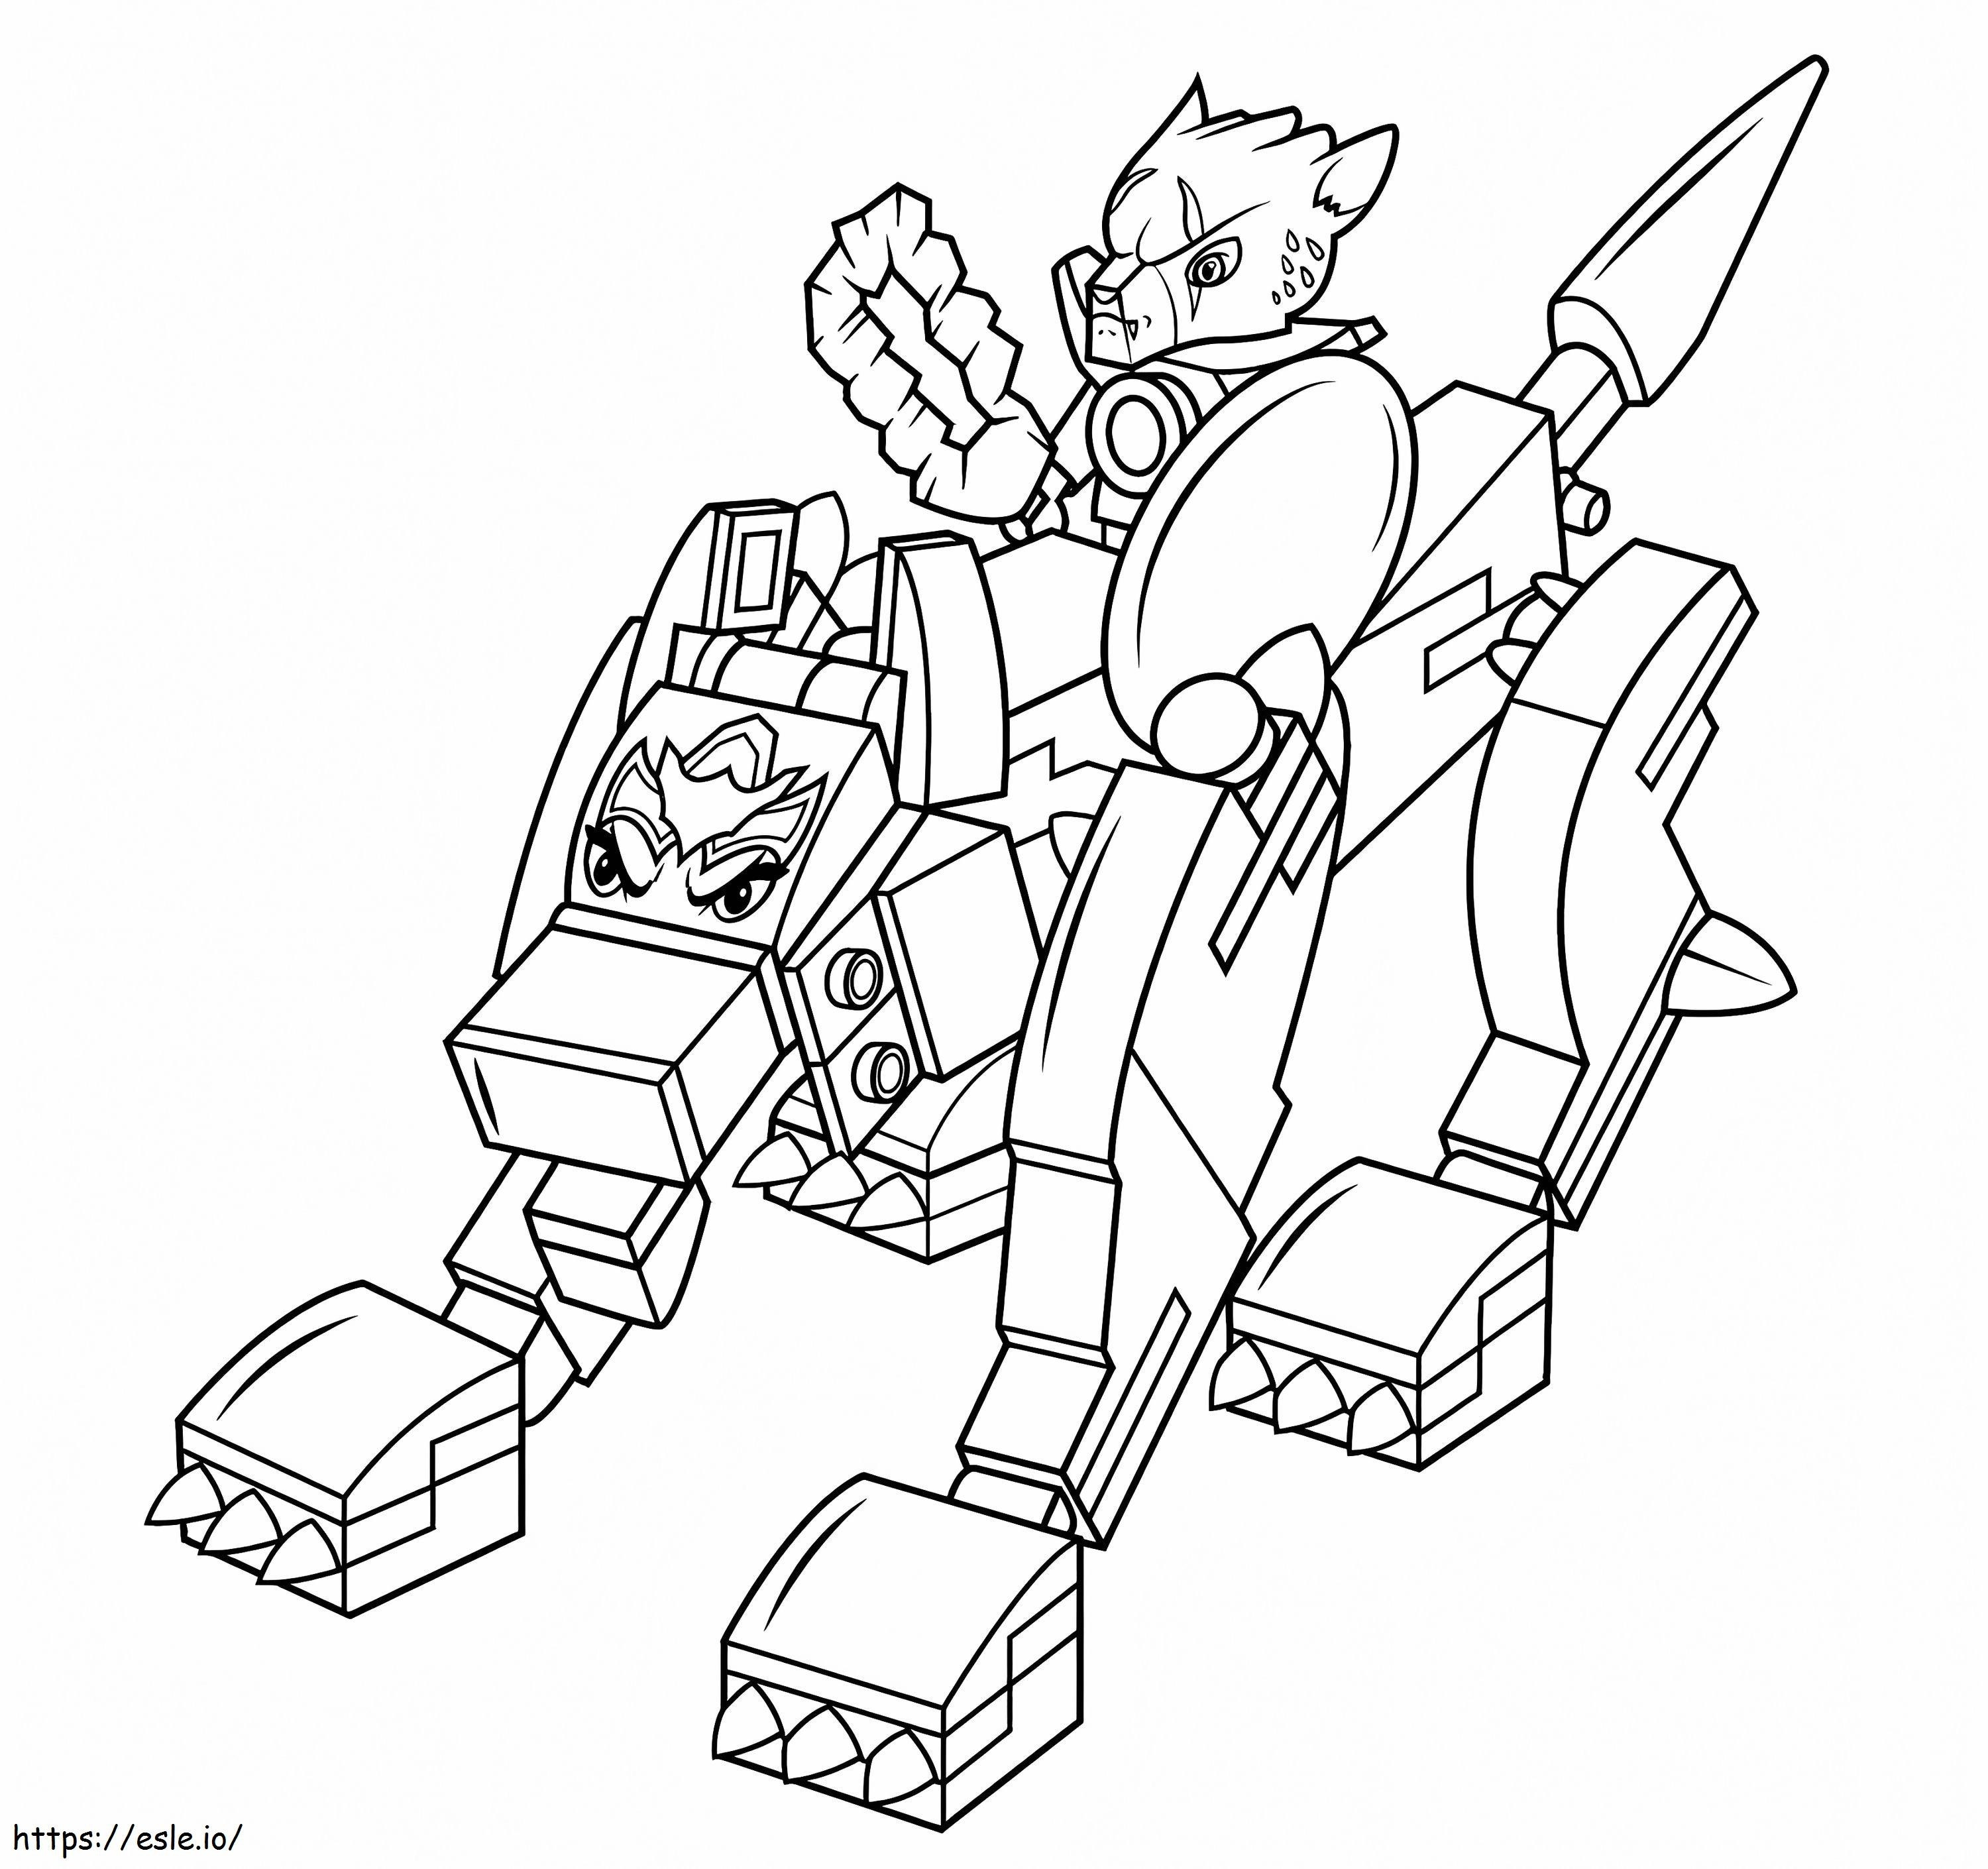 Lego Chima Wolf coloring page